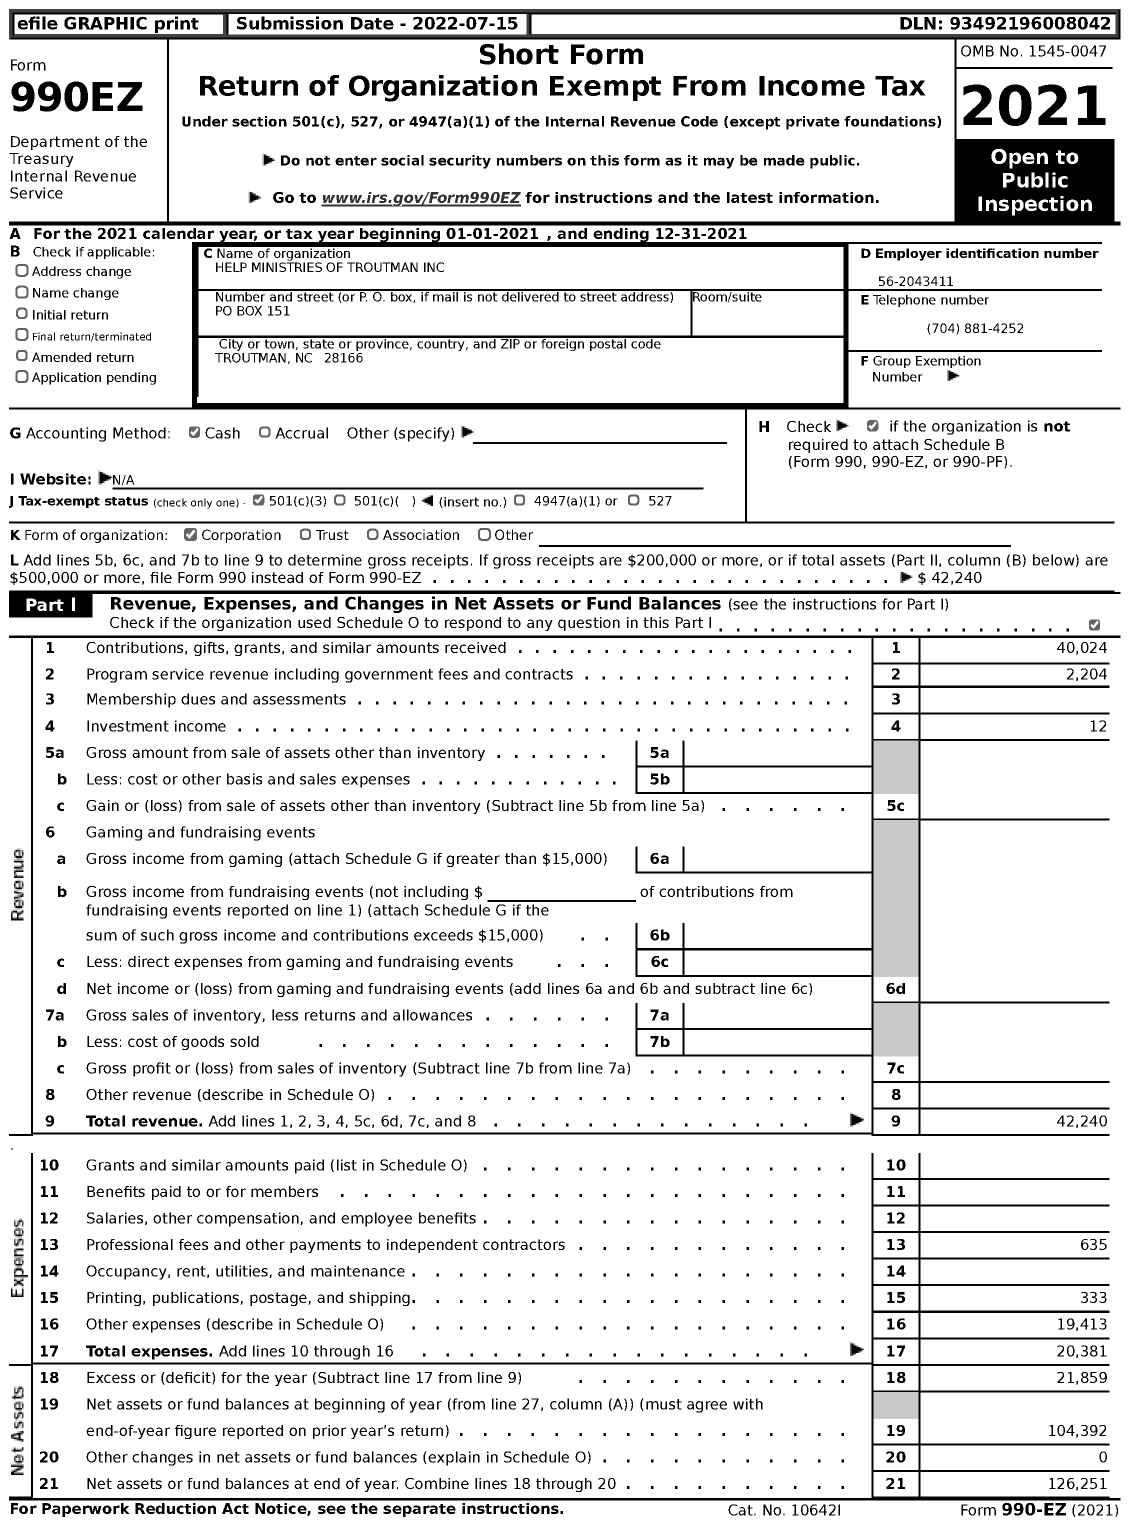 Image of first page of 2021 Form 990EZ for Help Ministries of Troutman